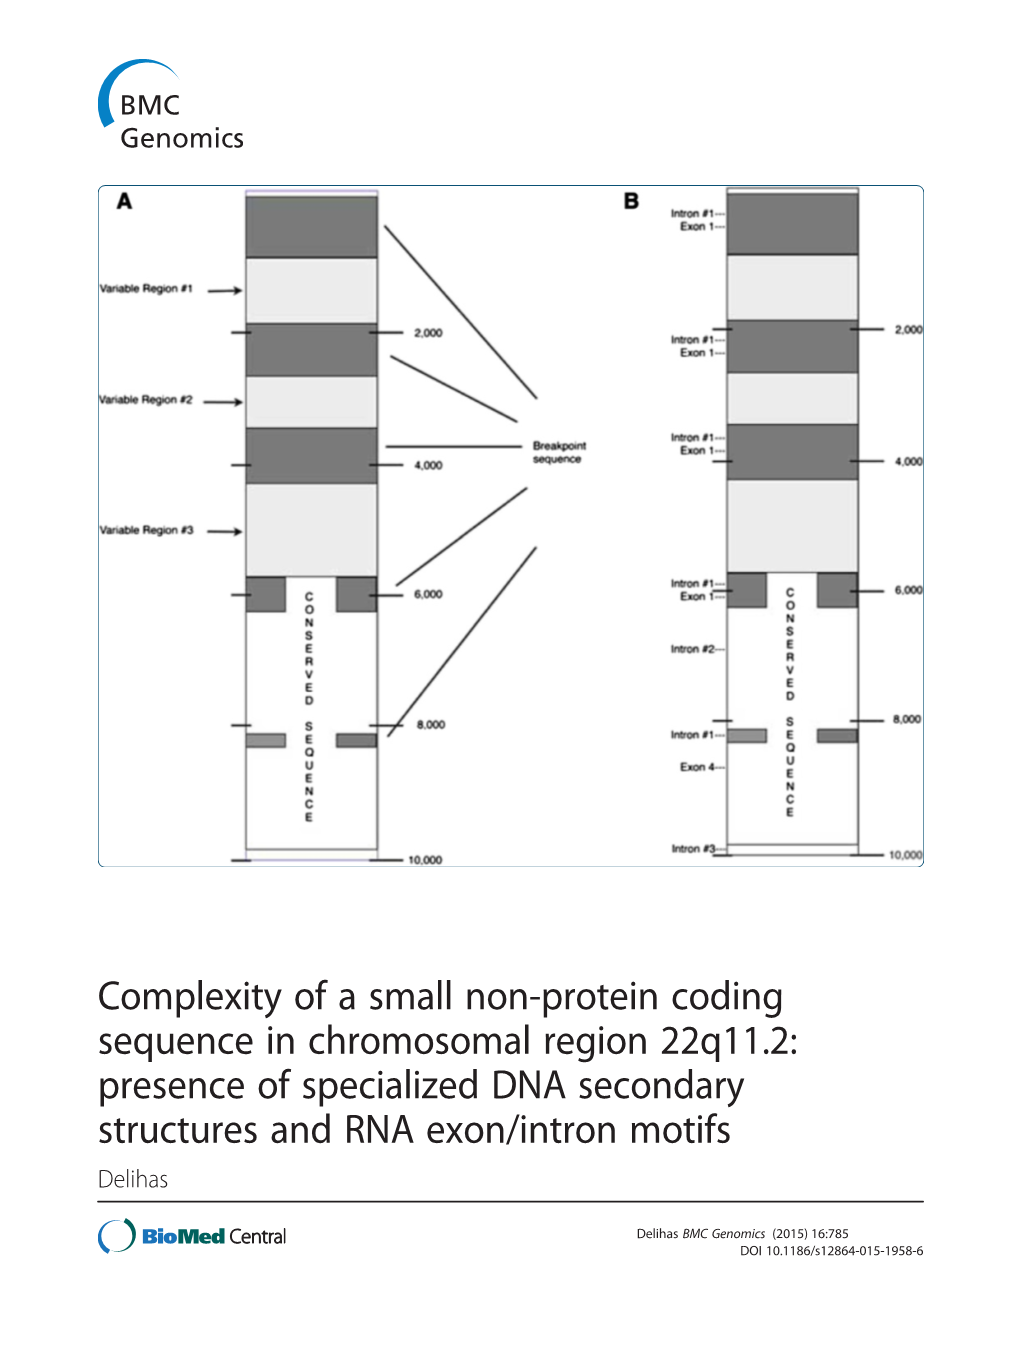 Complexity of a Small Non-Protein Coding Sequence in Chromosomal Region 22Q11.2: Presence of Specialized DNA Secondary Structures and RNA Exon/Intron Motifs Delihas